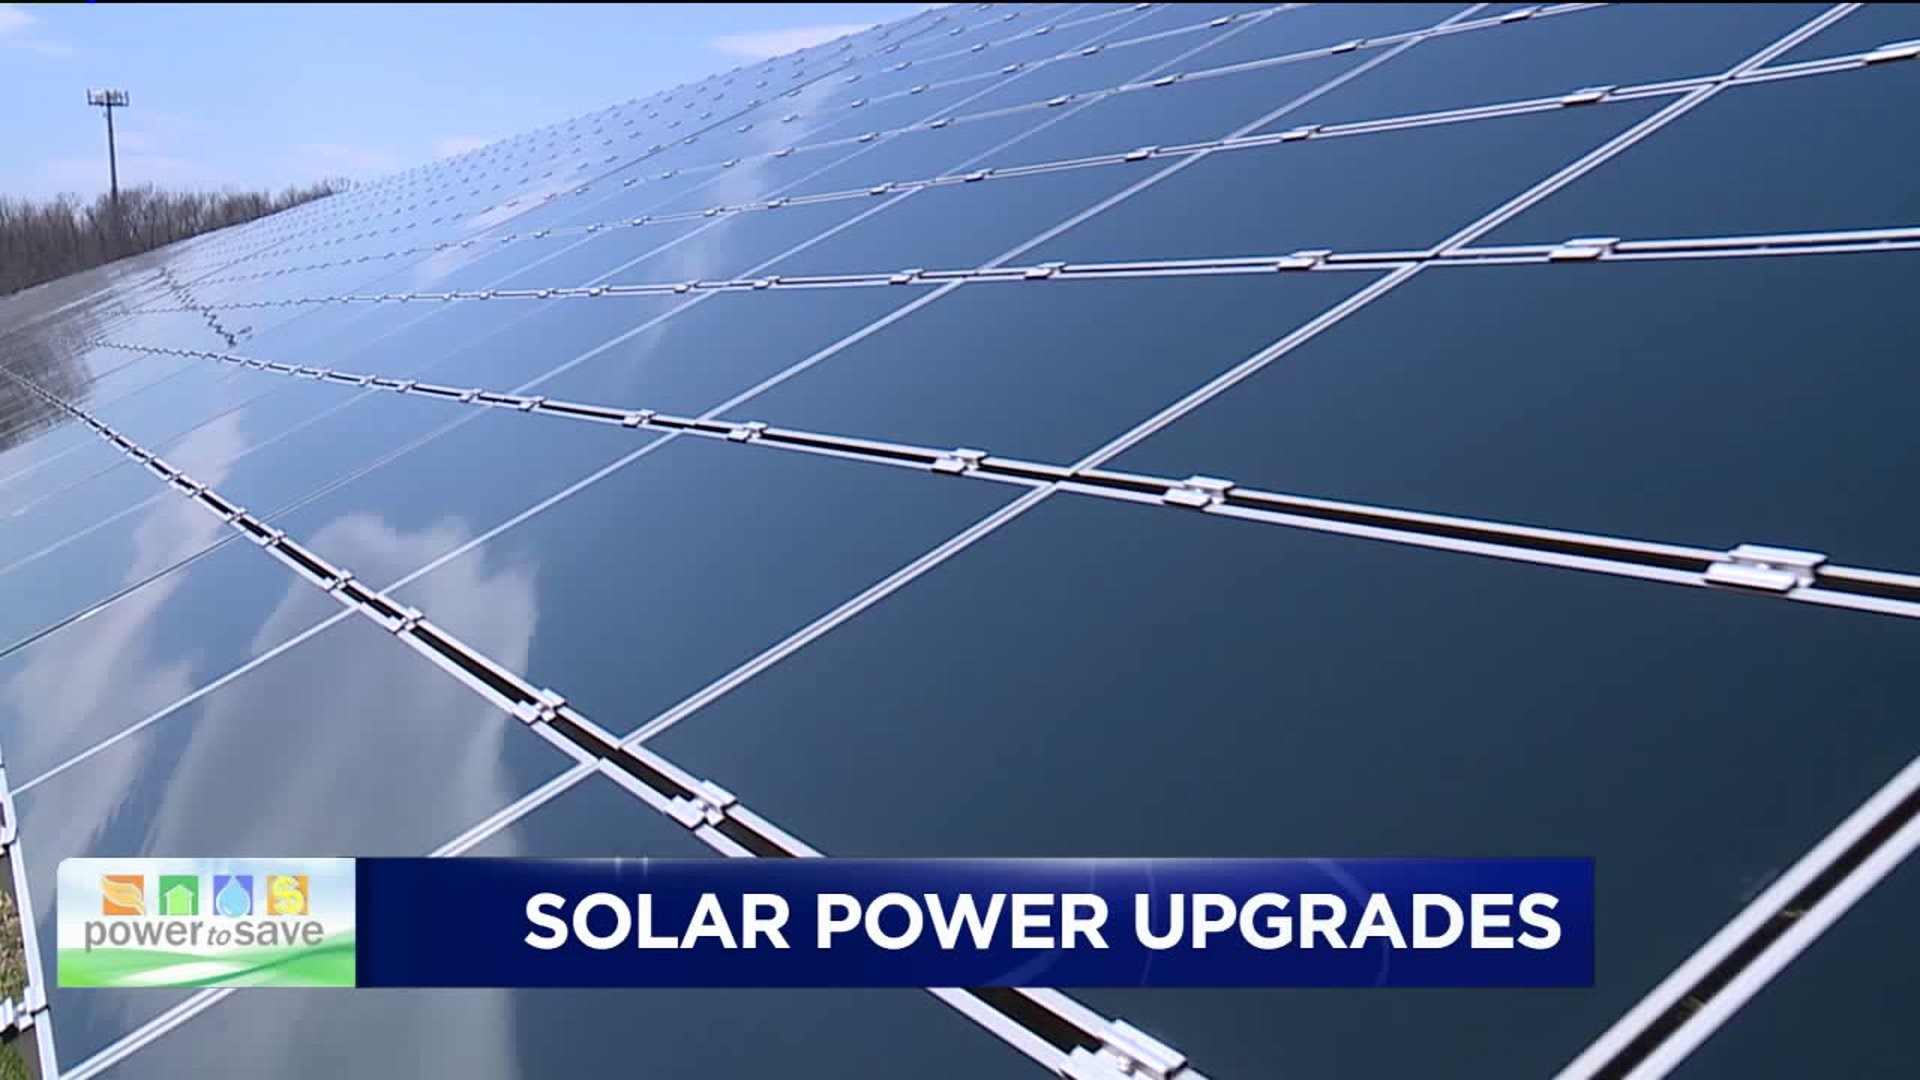 Power to Save: Solar Power Upgrades